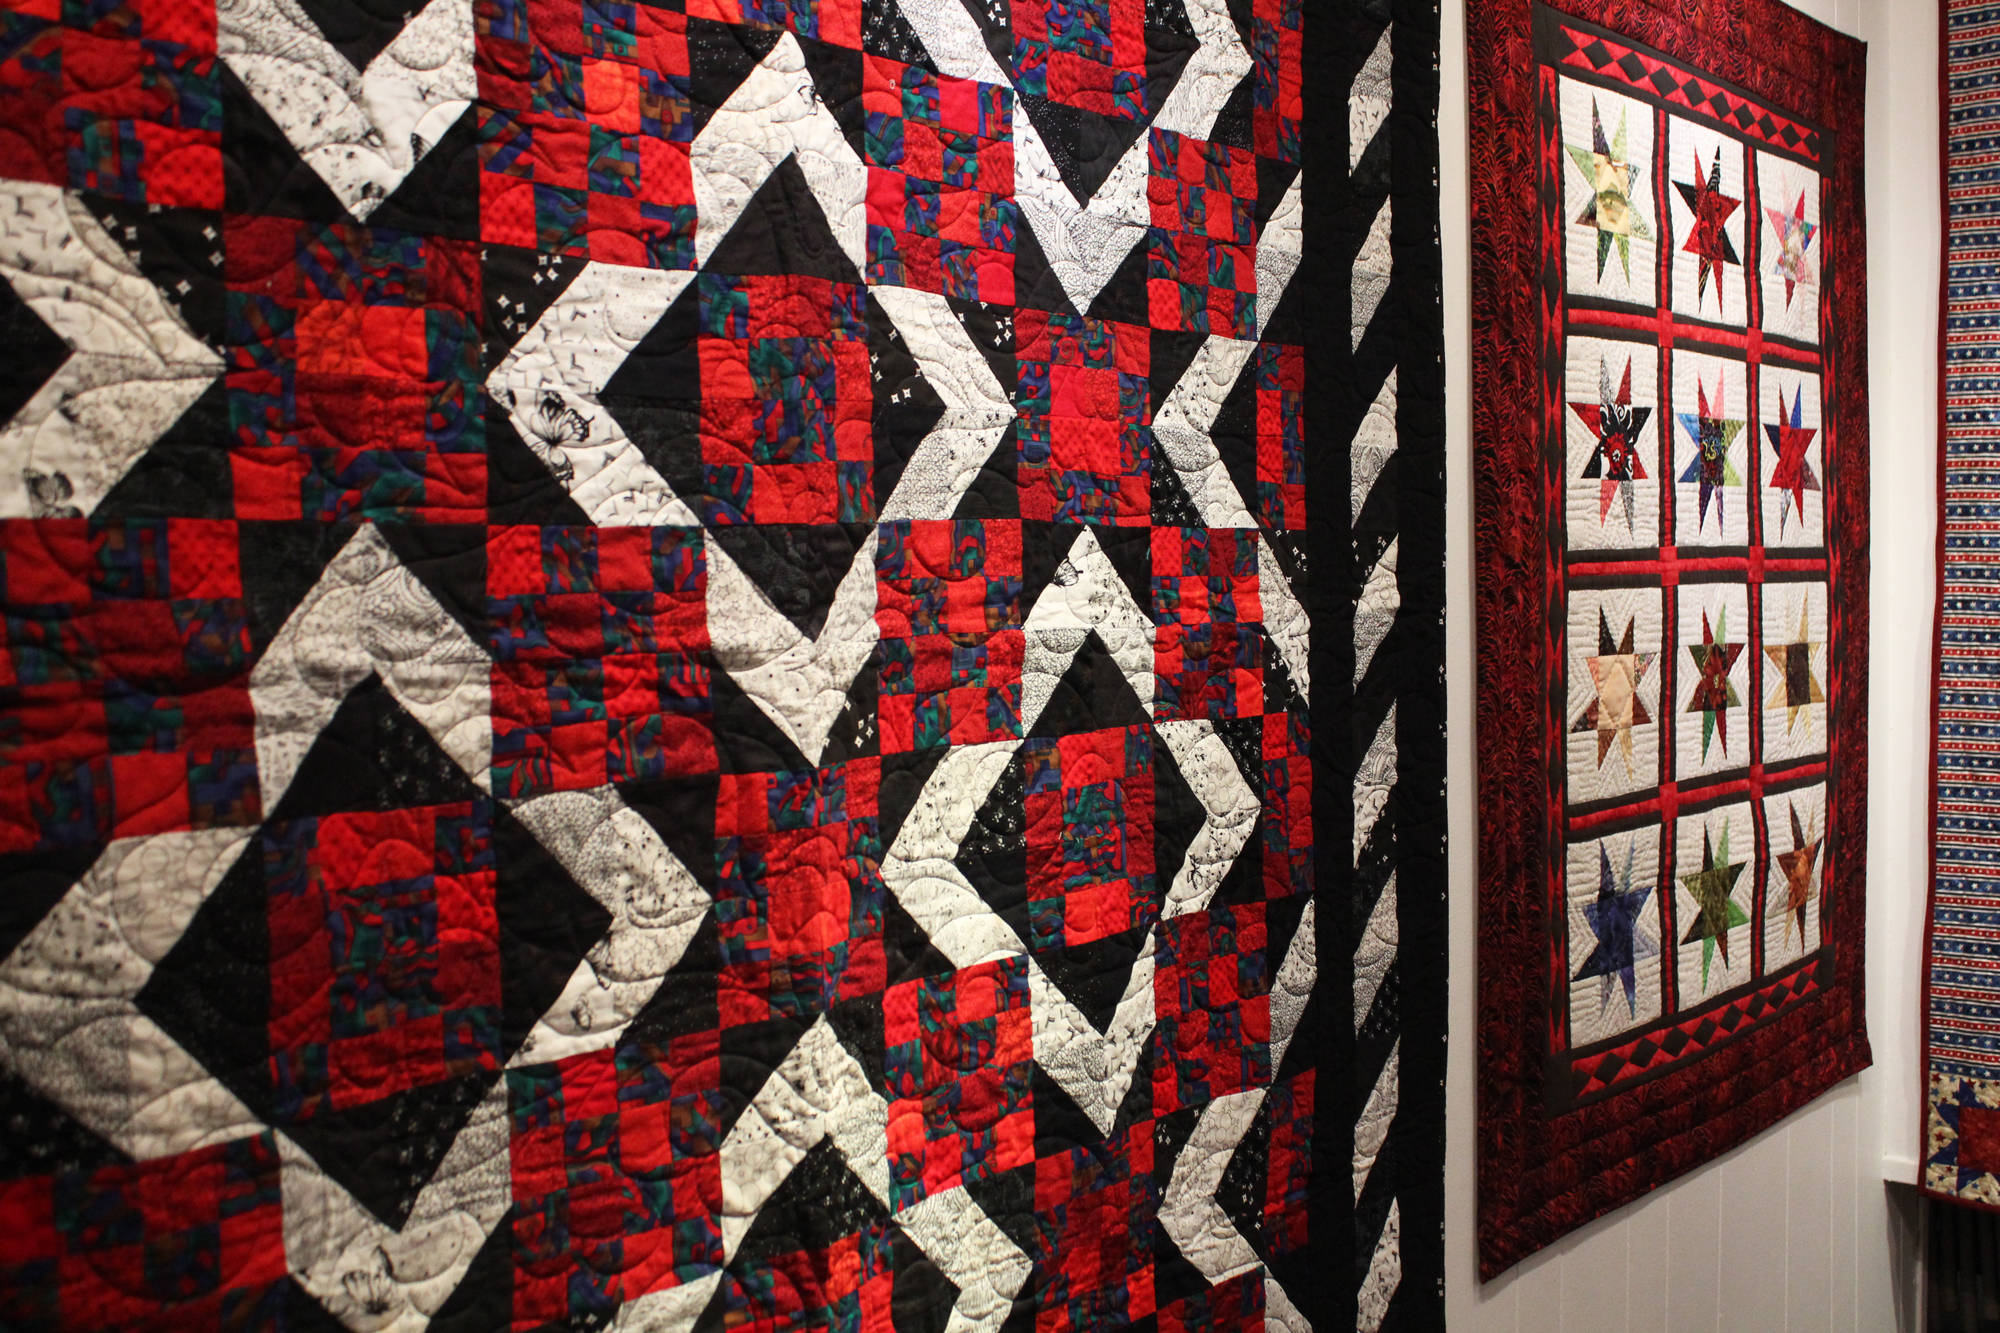 The Kachemak Bay Quilters spend a lot of their time creating quilts for victims of house fires, like the ones shown here during a First Friday exhibit Nov. 3 at the Homer Council on the Arts in Homer. (Photo by Megan Pacer/Homer News)